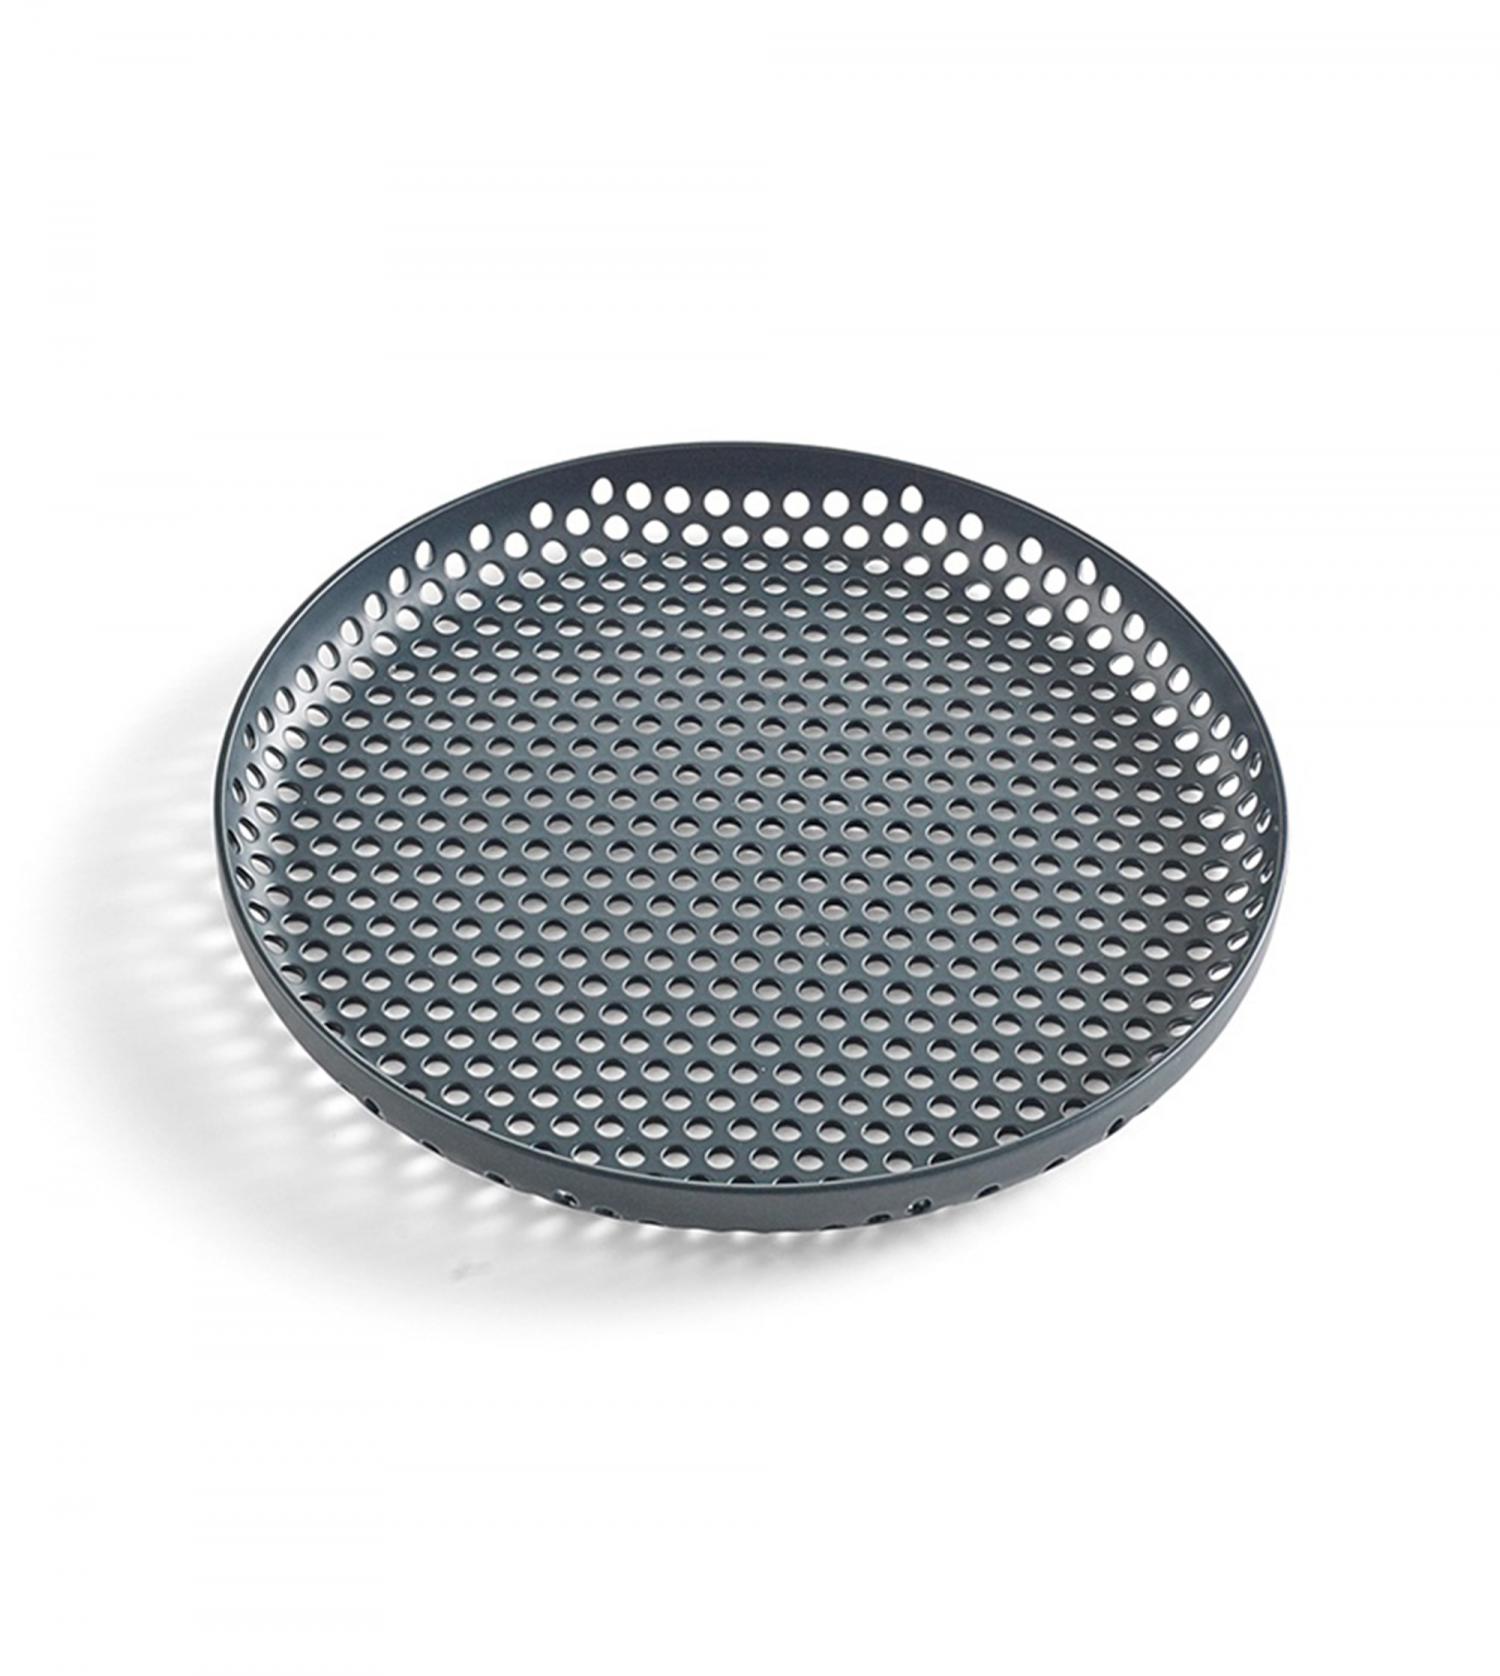 Plateau perforé /  Perforated tray  Taille S